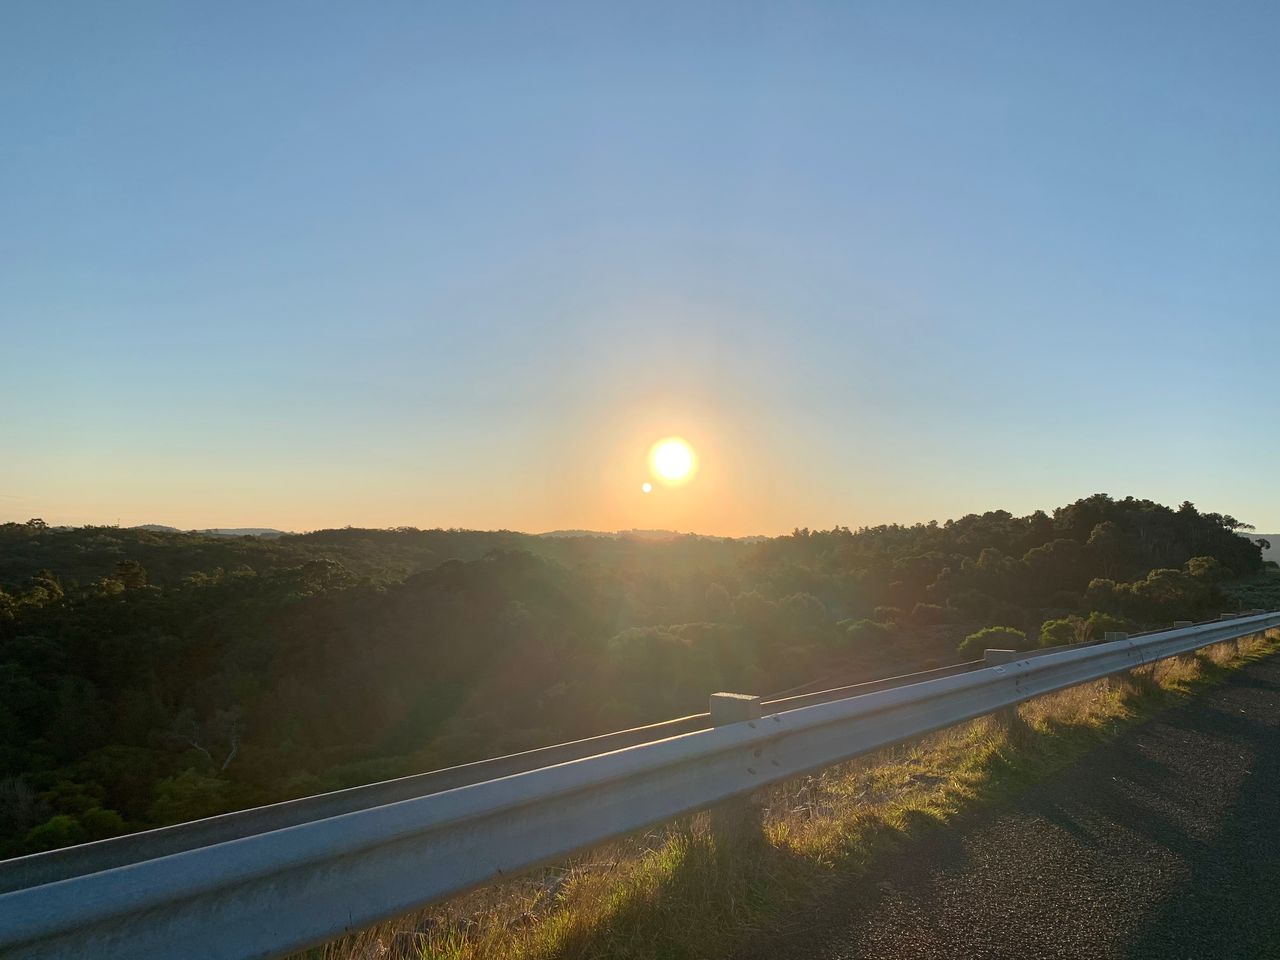 sky, horizon, morning, road, nature, sun, transportation, sunlight, landscape, sunrise, environment, scenics - nature, dawn, beauty in nature, tranquility, no people, hill, highway, tranquil scene, plant, lens flare, land, travel, clear sky, non-urban scene, sunbeam, outdoors, sunny, idyllic, tree, blue, light, rural scene, travel destinations, copy space, country road, infrastructure, the way forward, street, cloud, twilight, water, field